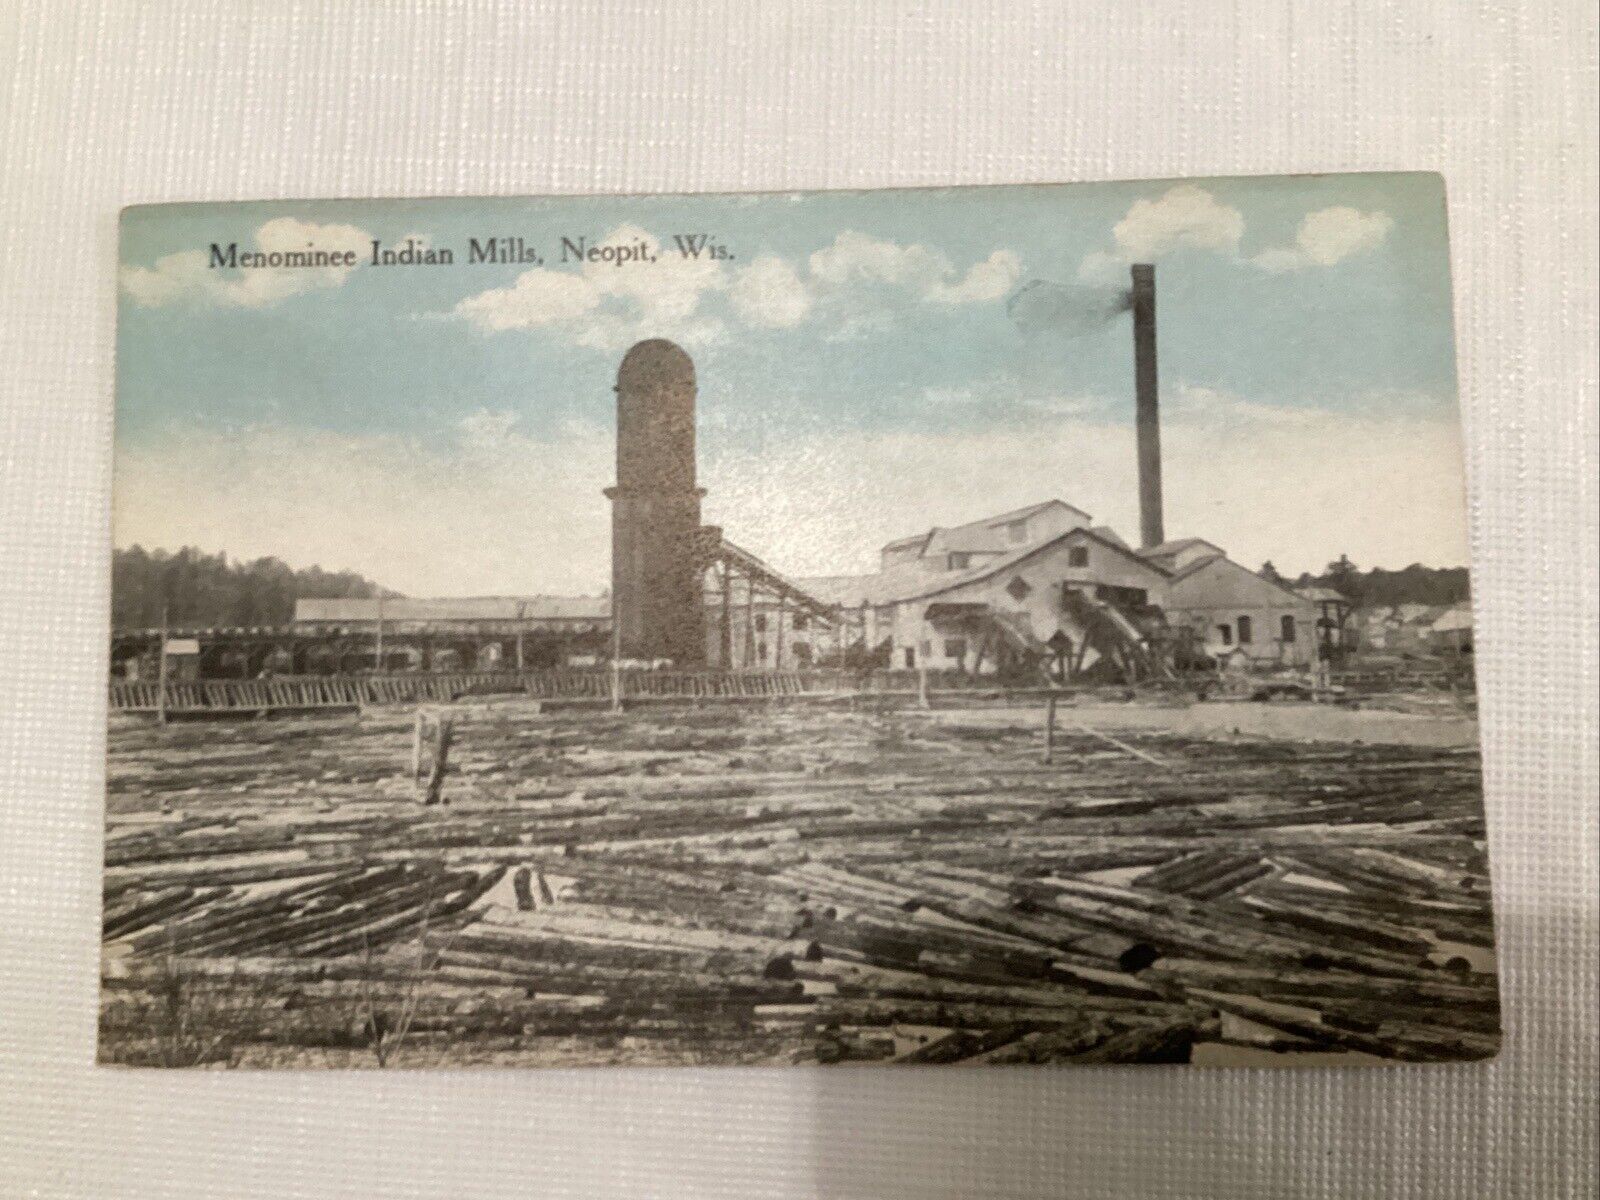 VTG  NEOPIT, WIS. MENOMINEE INDIAN SAWMILL Unposted Postcard